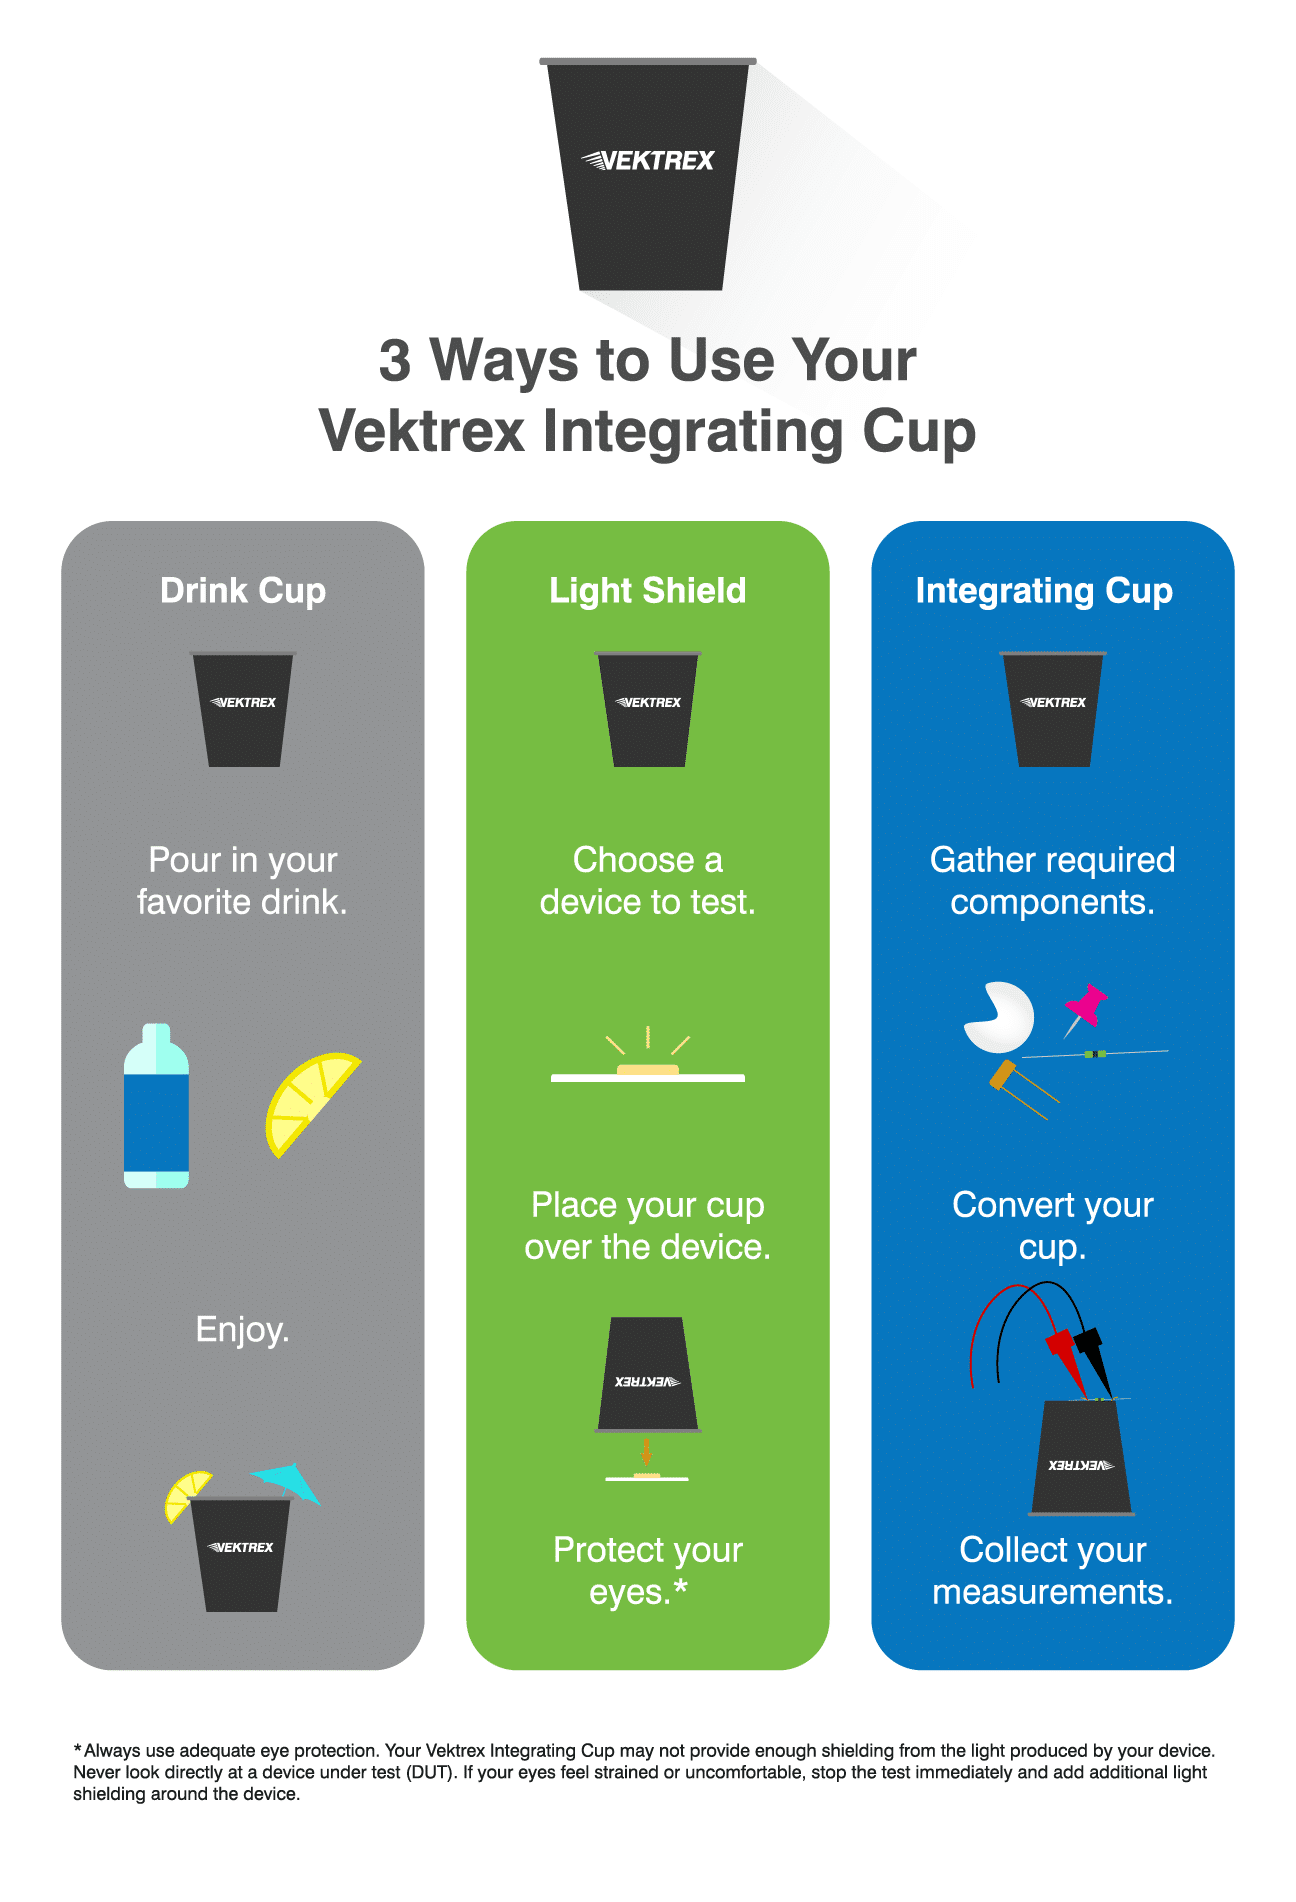 3 Ways to Use Your Vektrex Integrating Cup Infographic